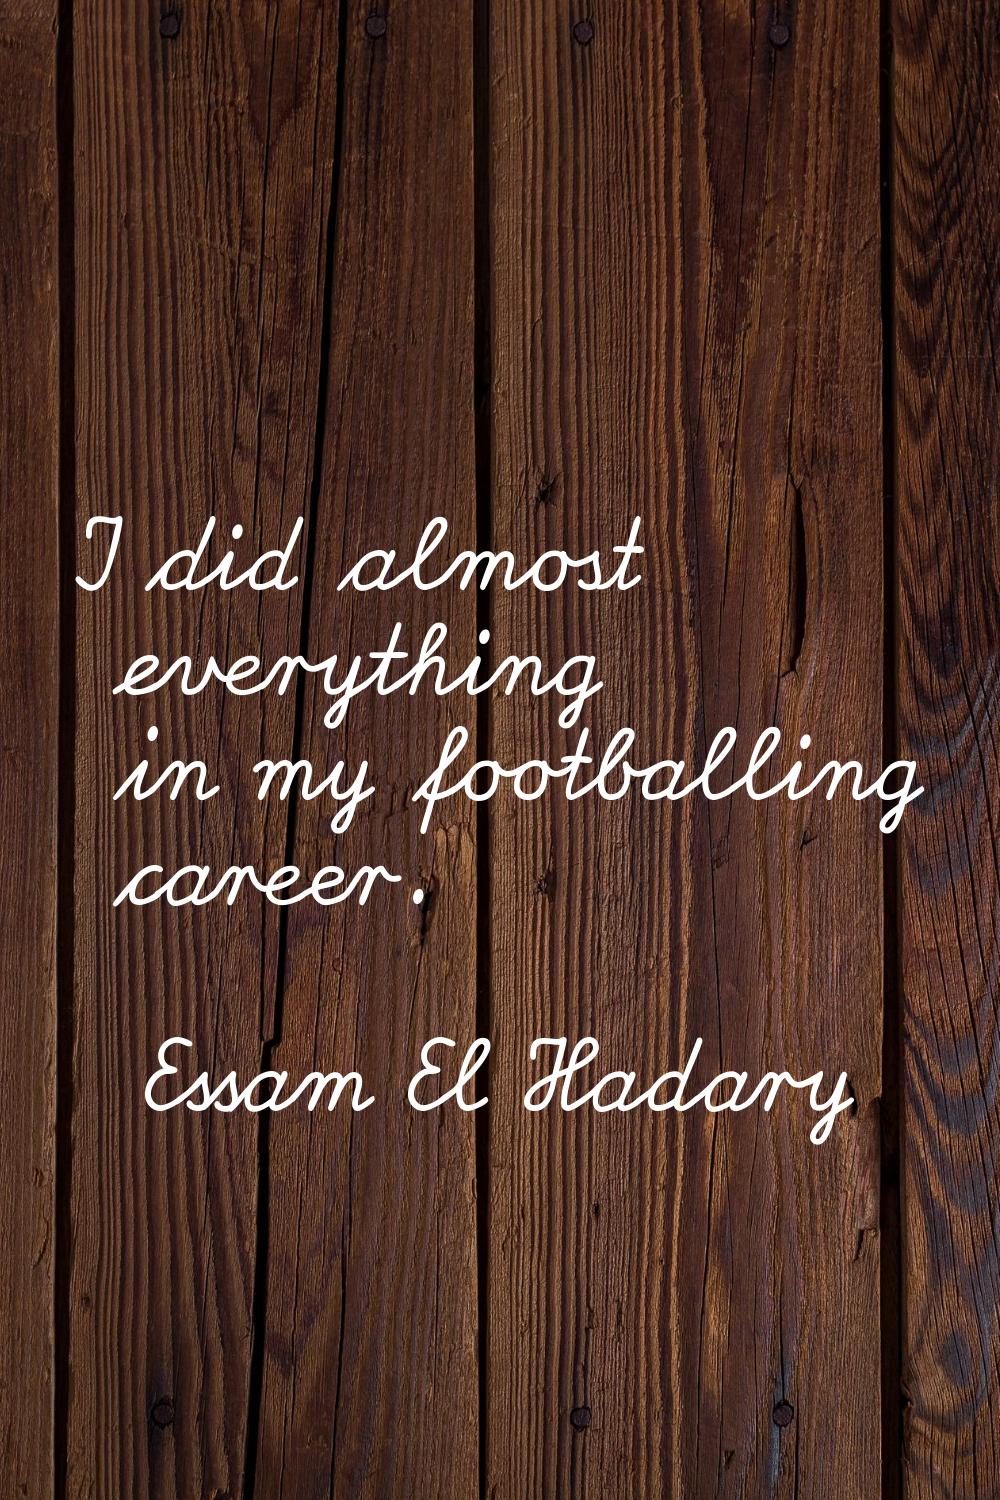 I did almost everything in my footballing career.